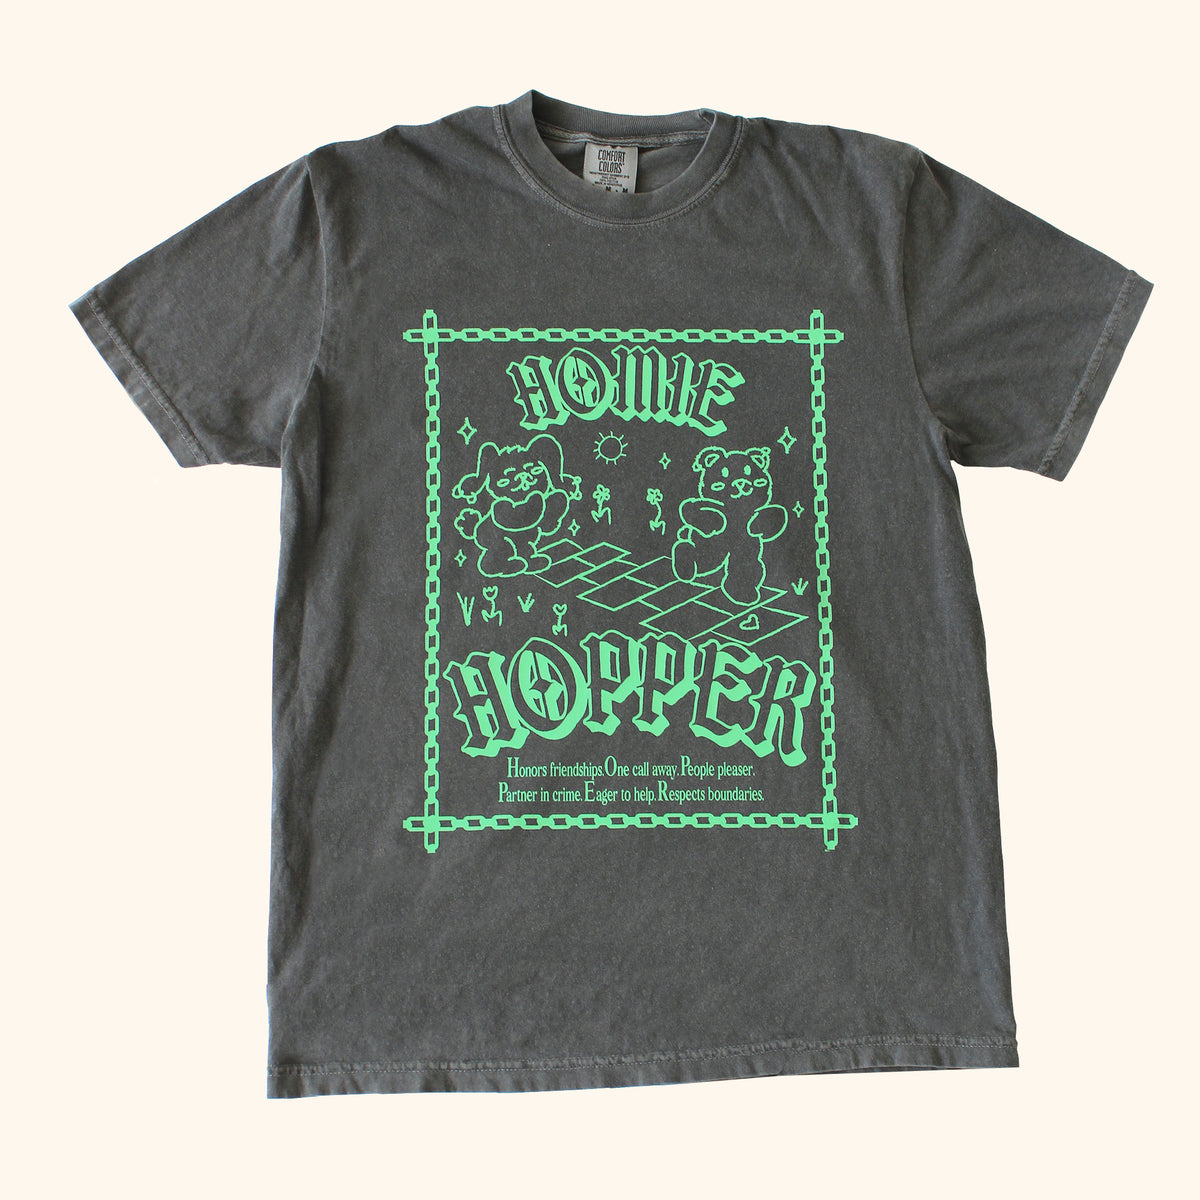 Homie Hopper | Pepper T-Shirt (Colorful Front Graphic)